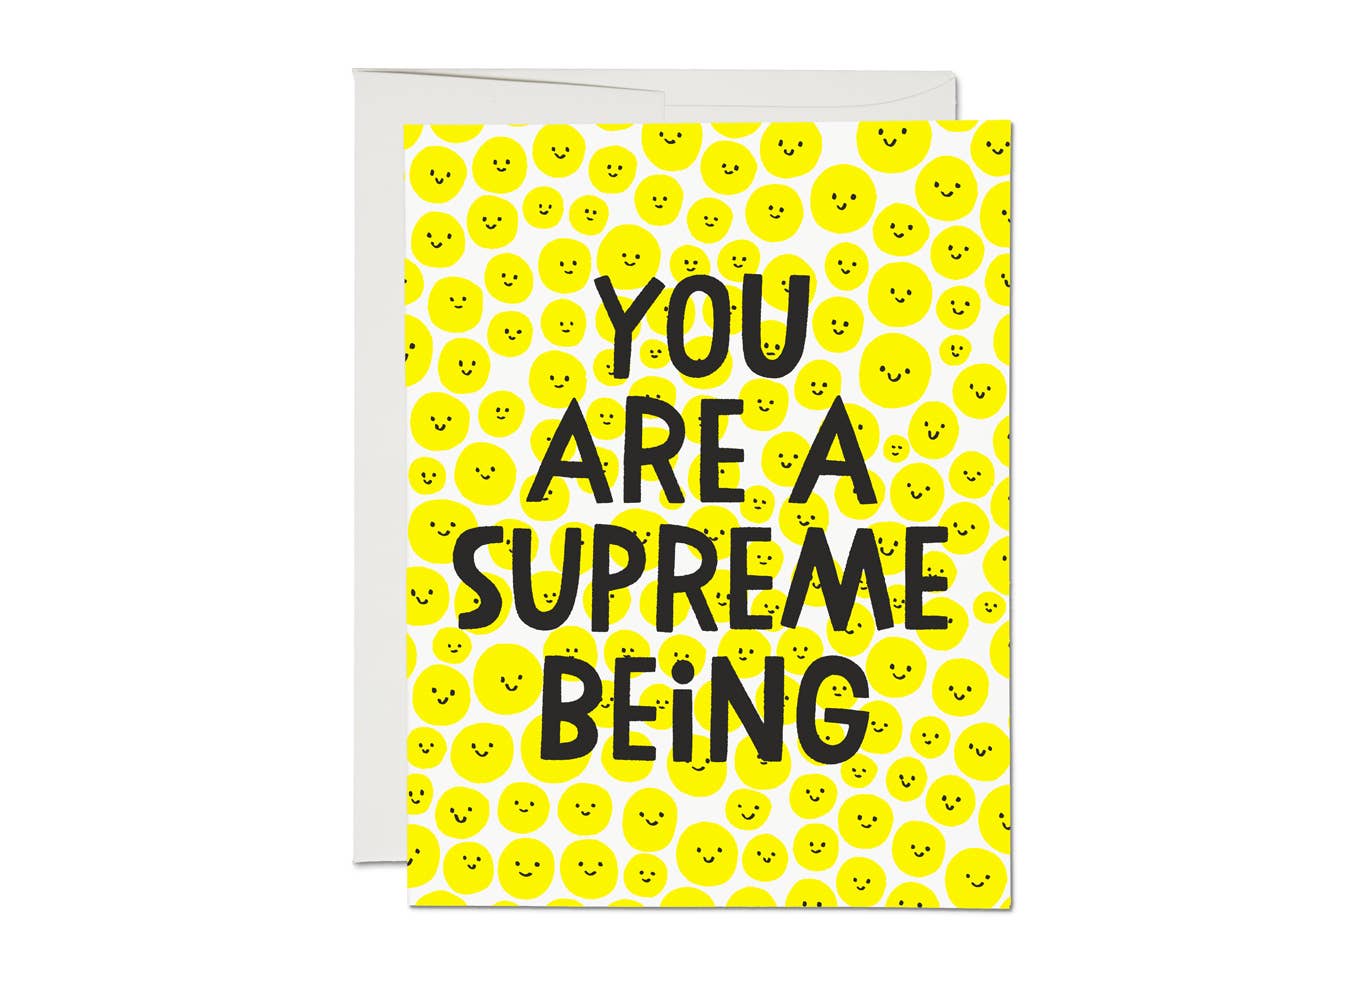 Smiley face greeting card with "You Are A Supreme Being" text